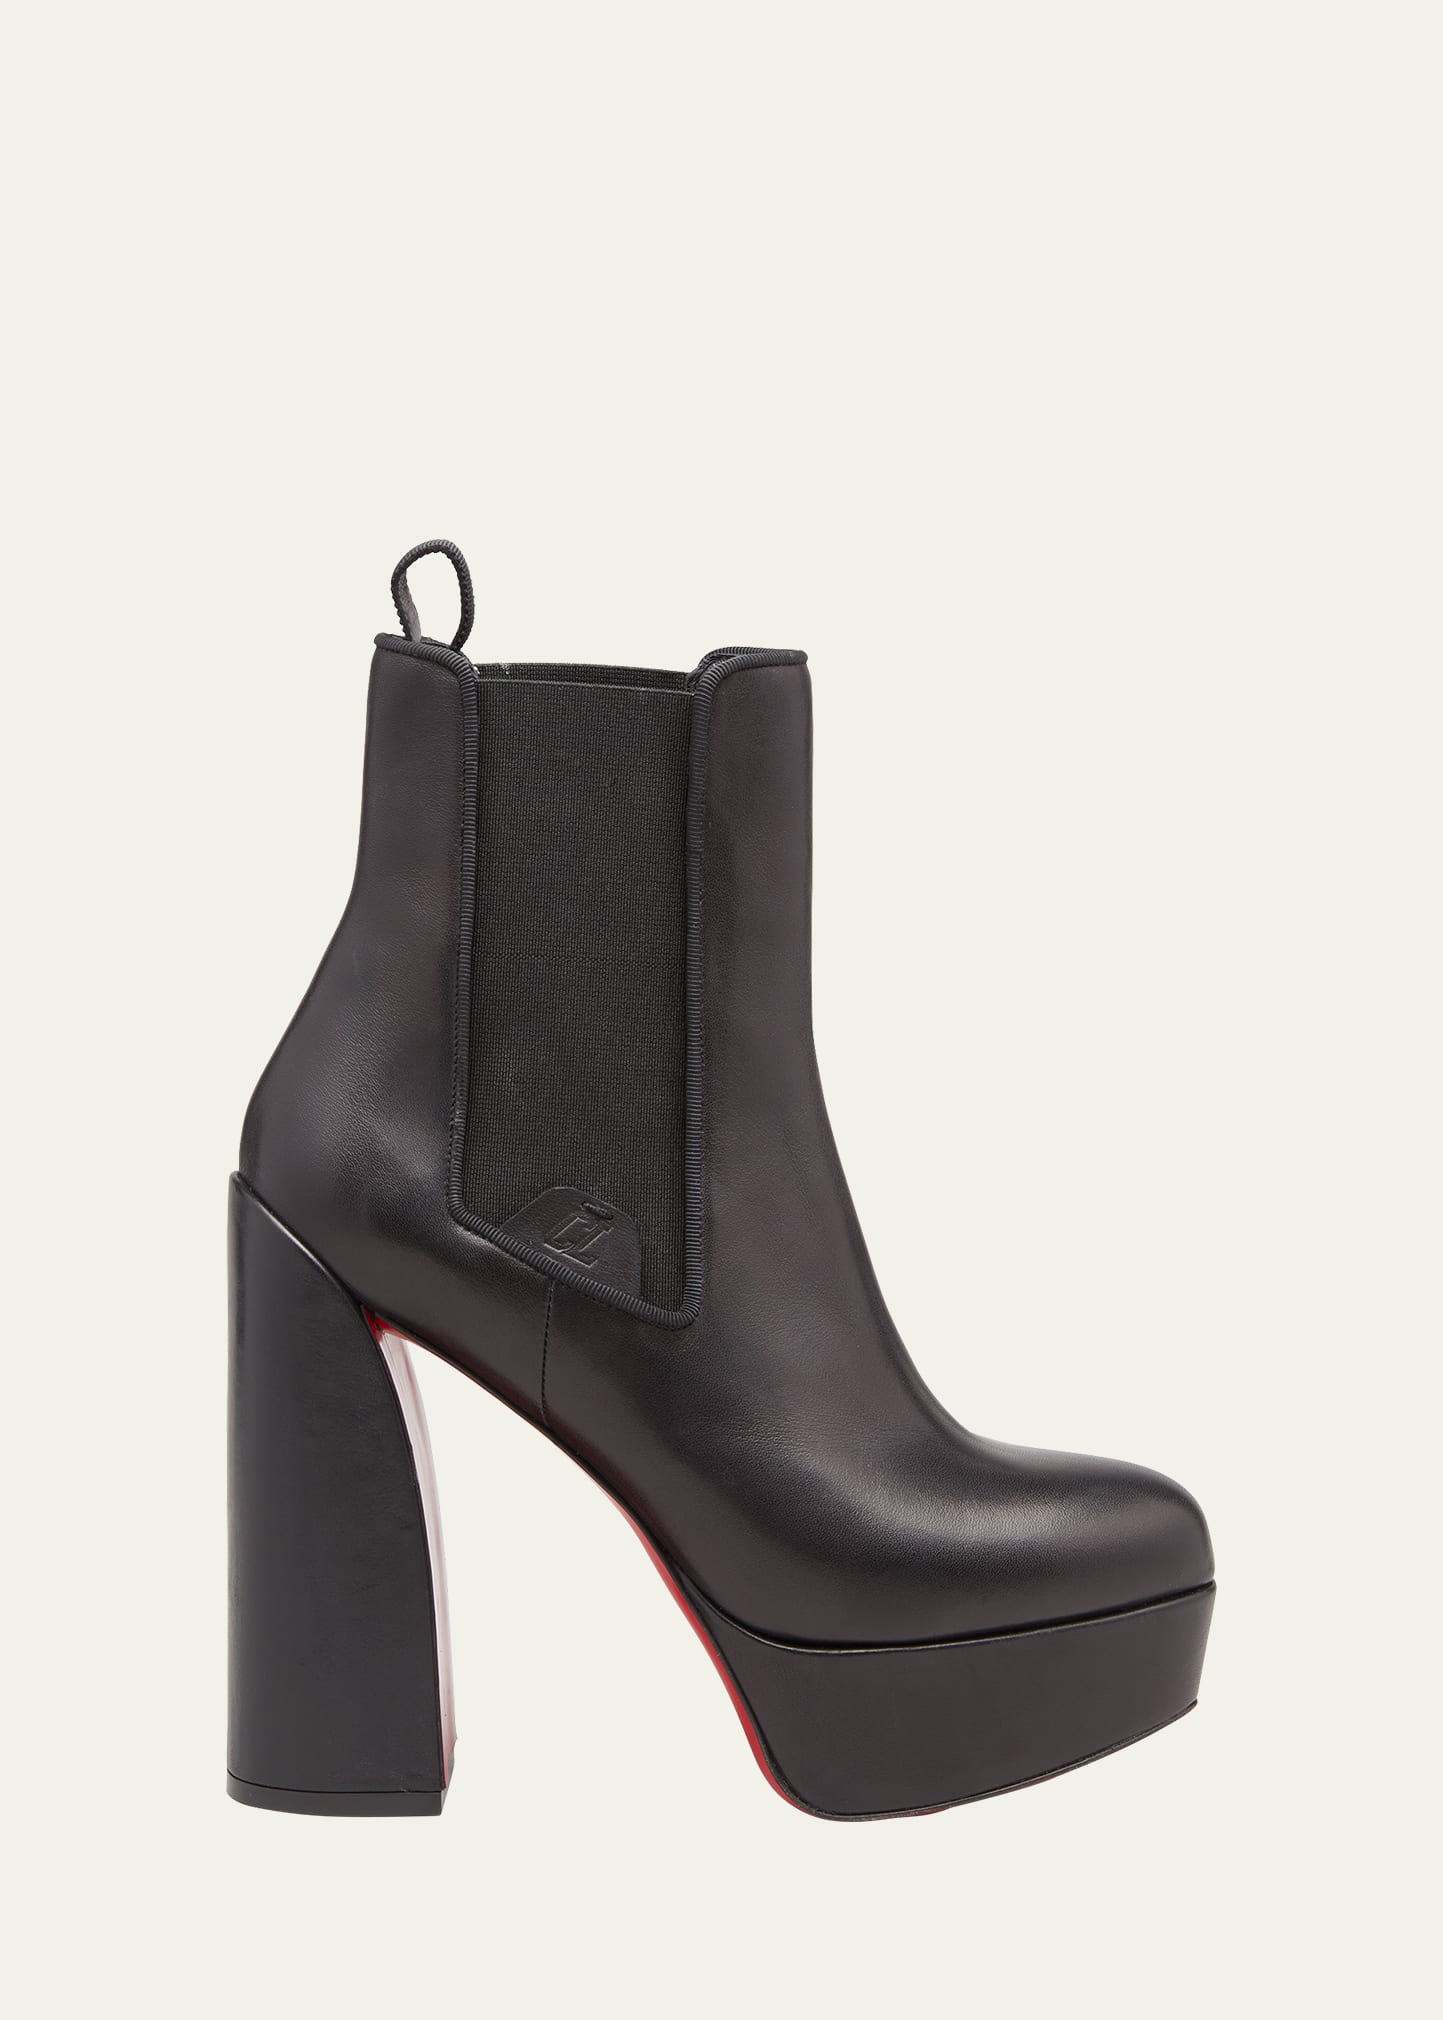 Leather Chelsea Red Sole Platform Booties